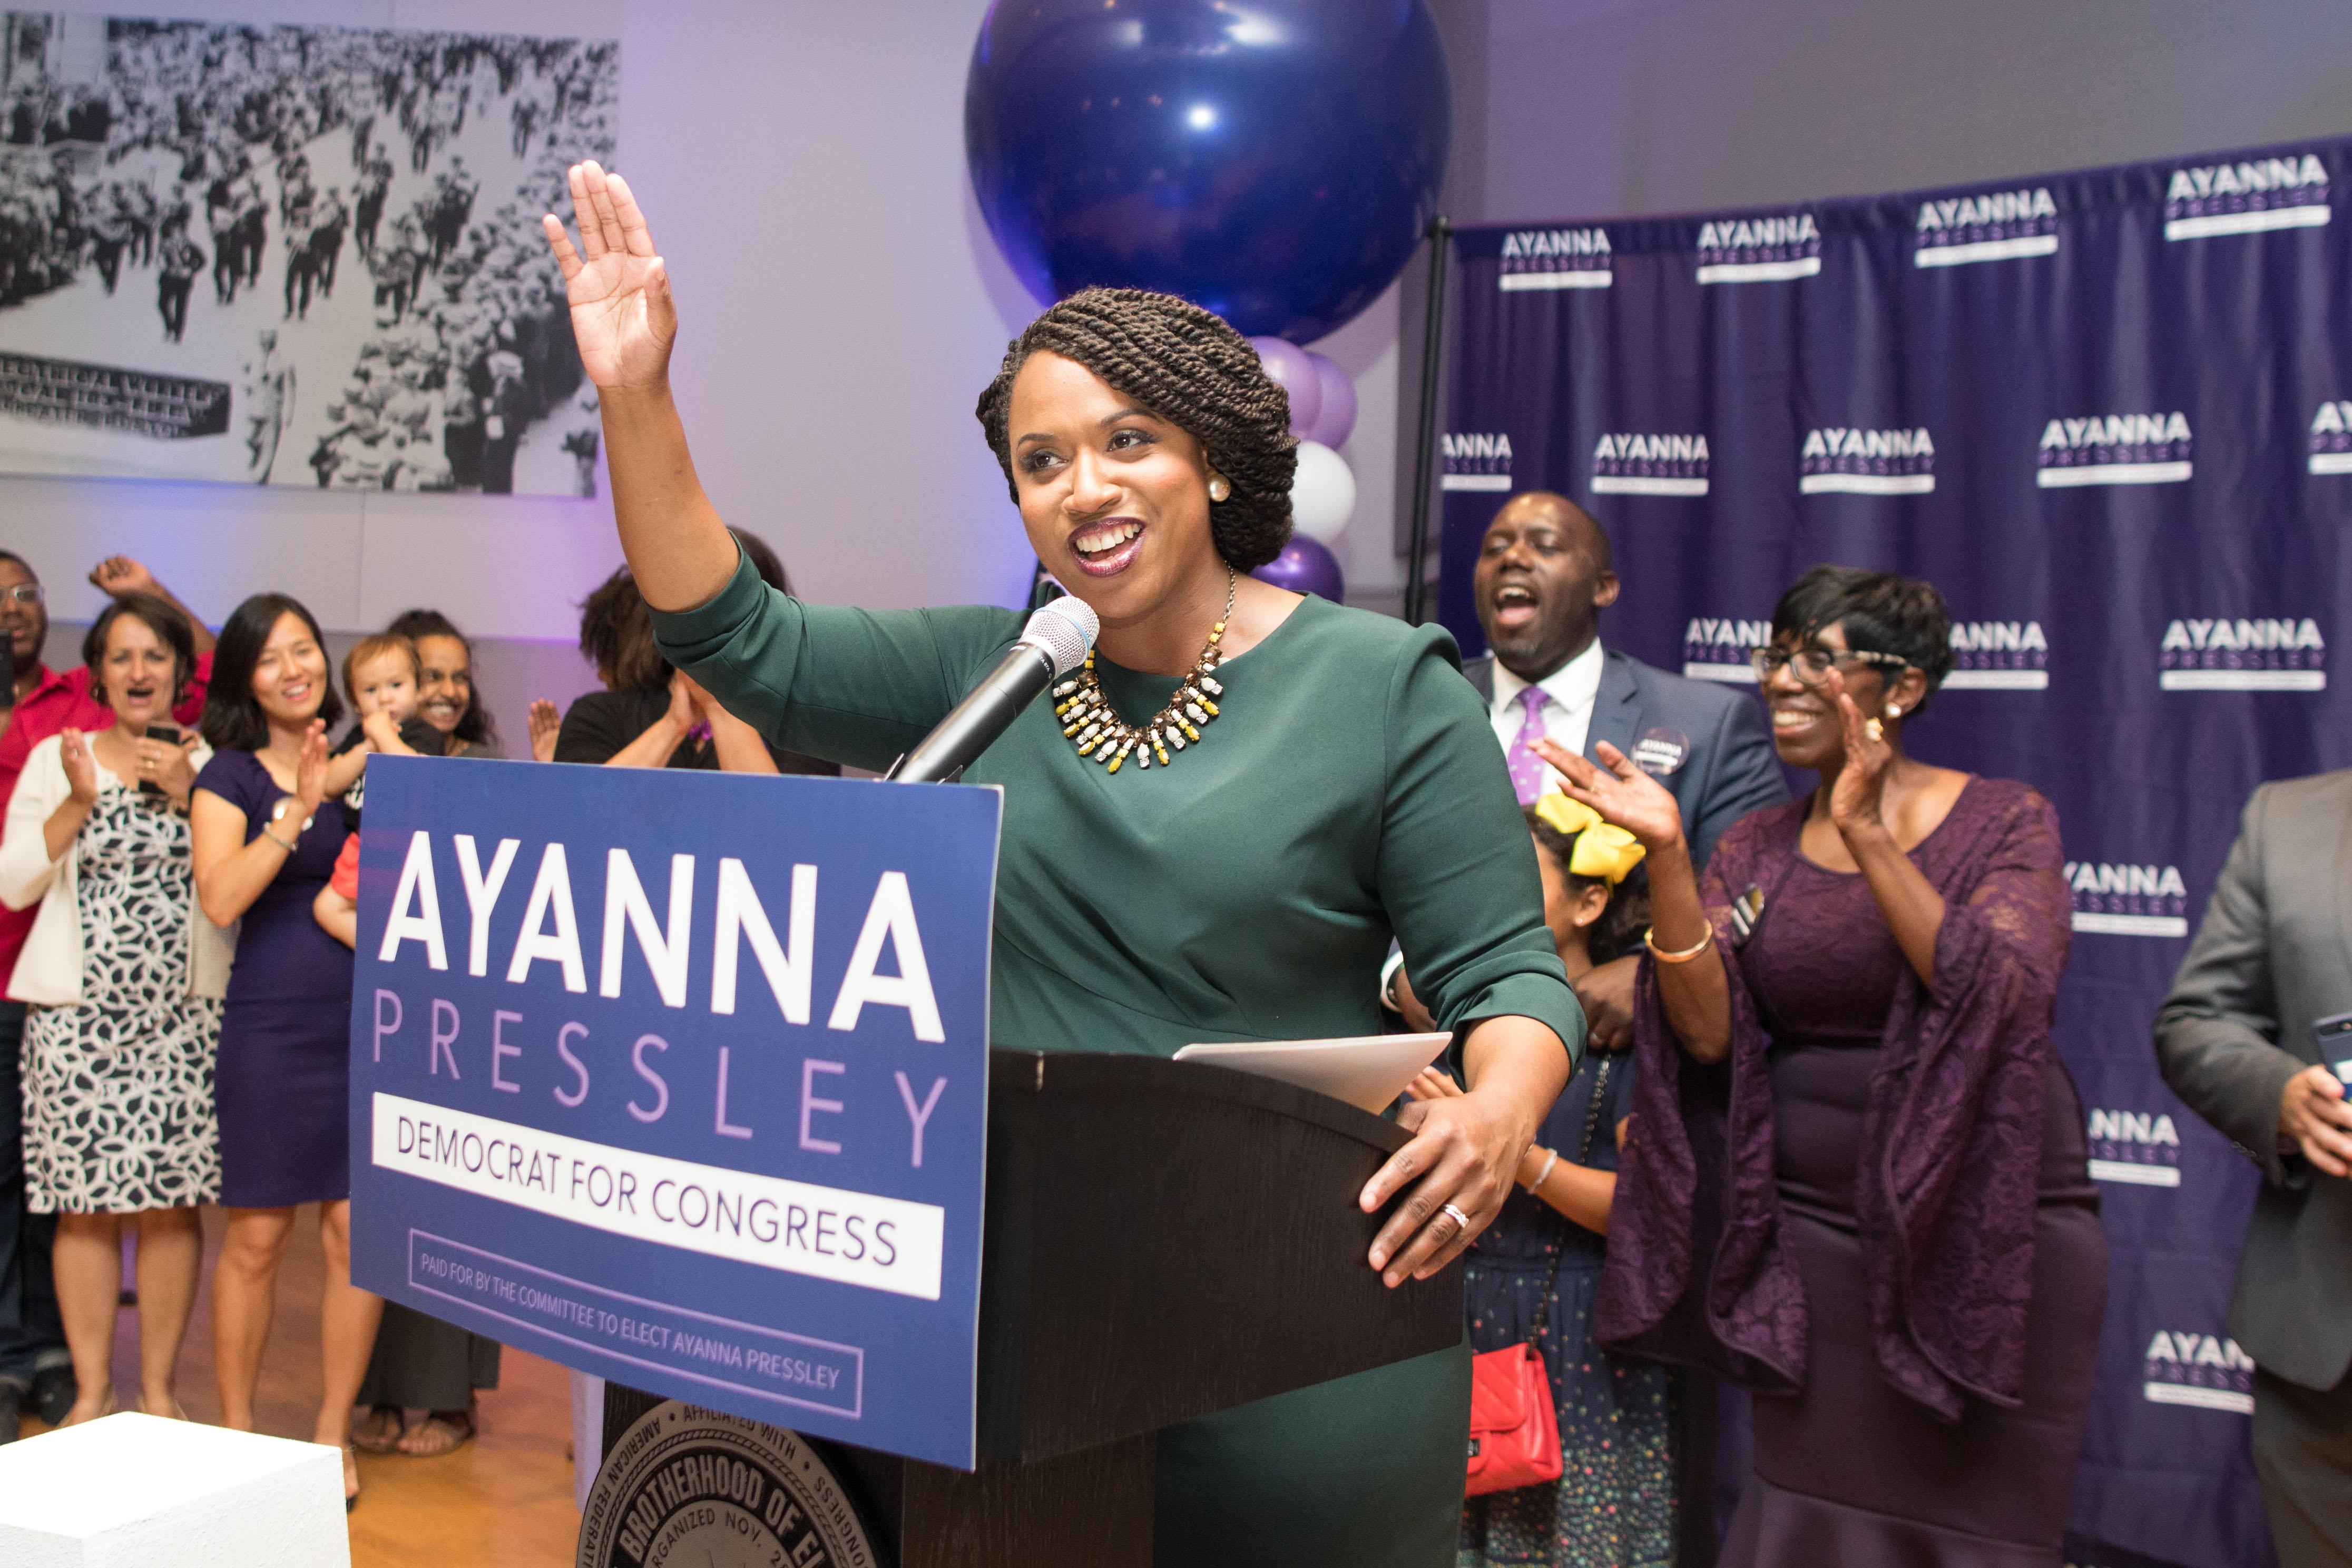 Ayanna Pressley surrounded by balloons and cheering supporters